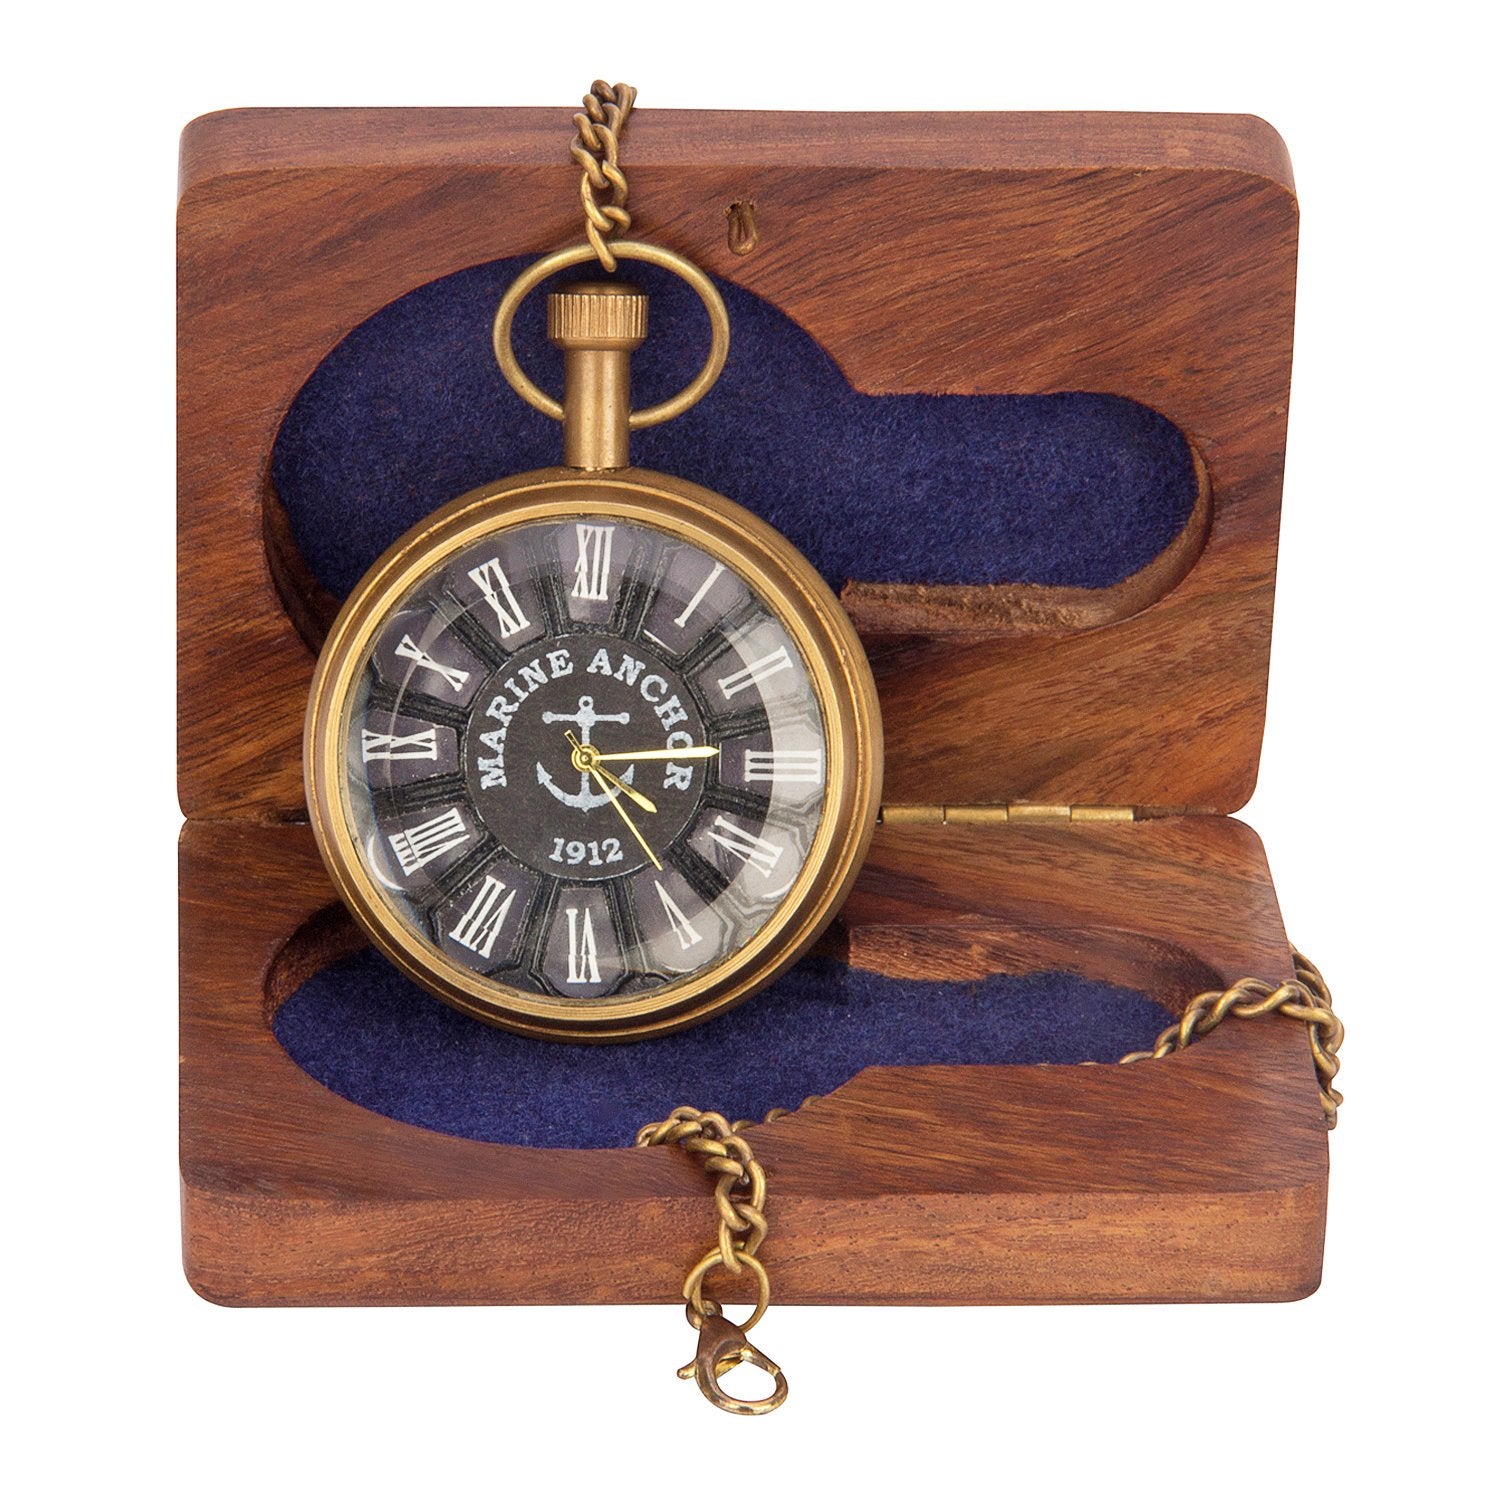 Antique Brass Pocket Watch 2' inch With Chain or wooden box